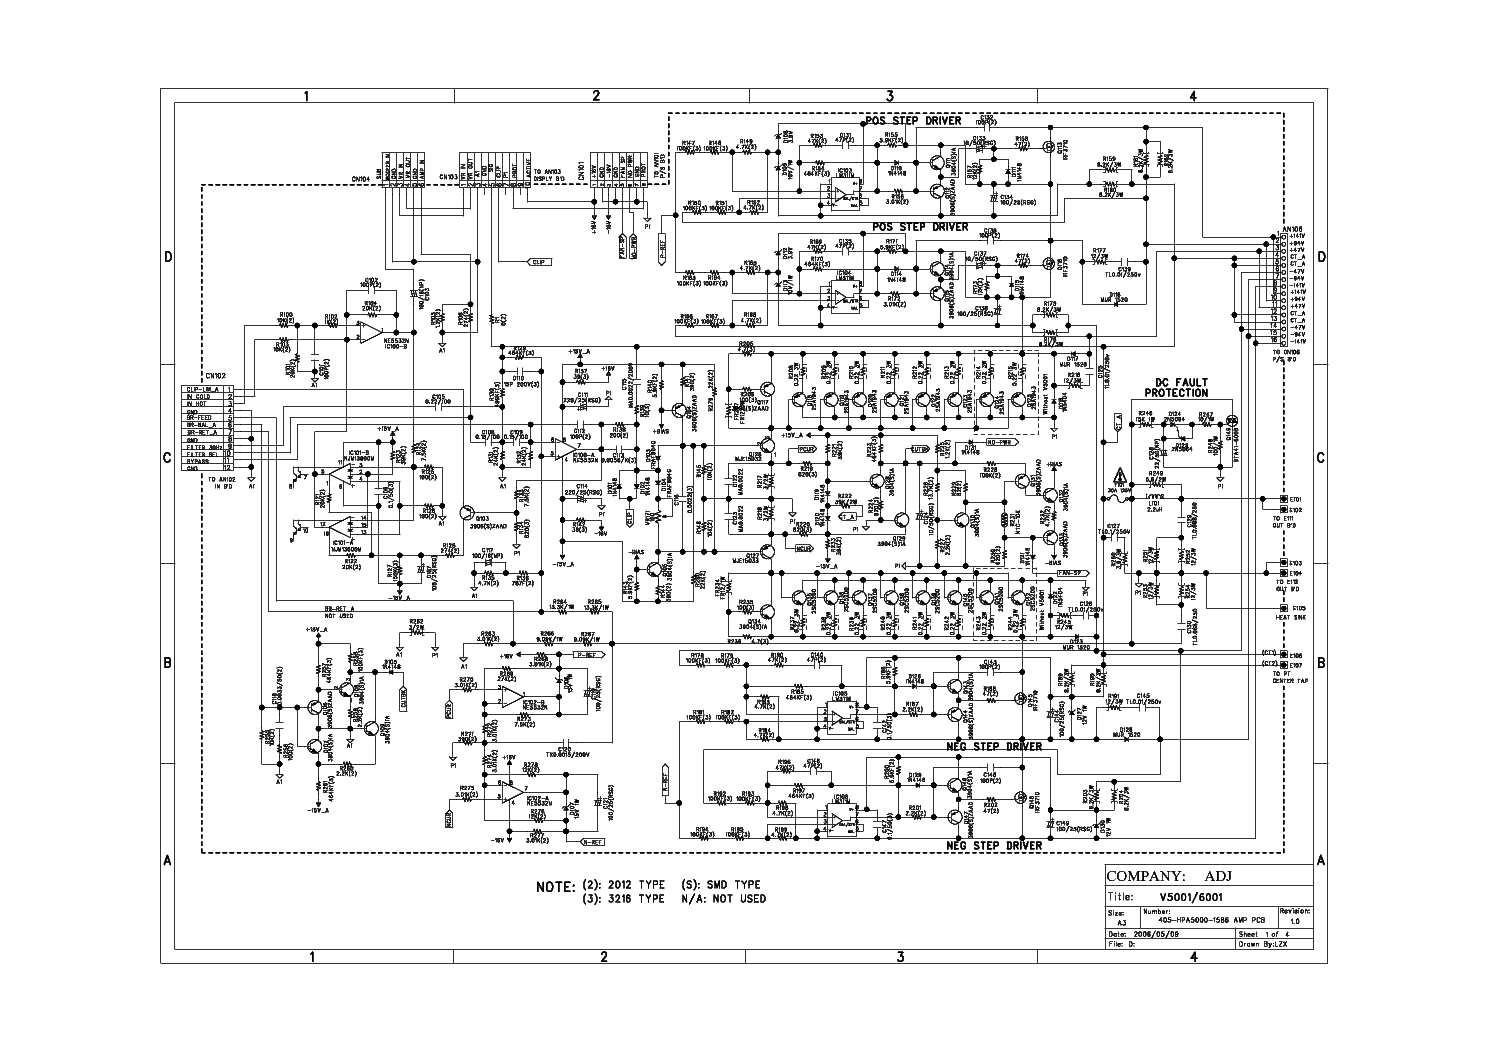 American Audio Power Amplifier Schematic Diagram Wiring Diagram For Light Switch